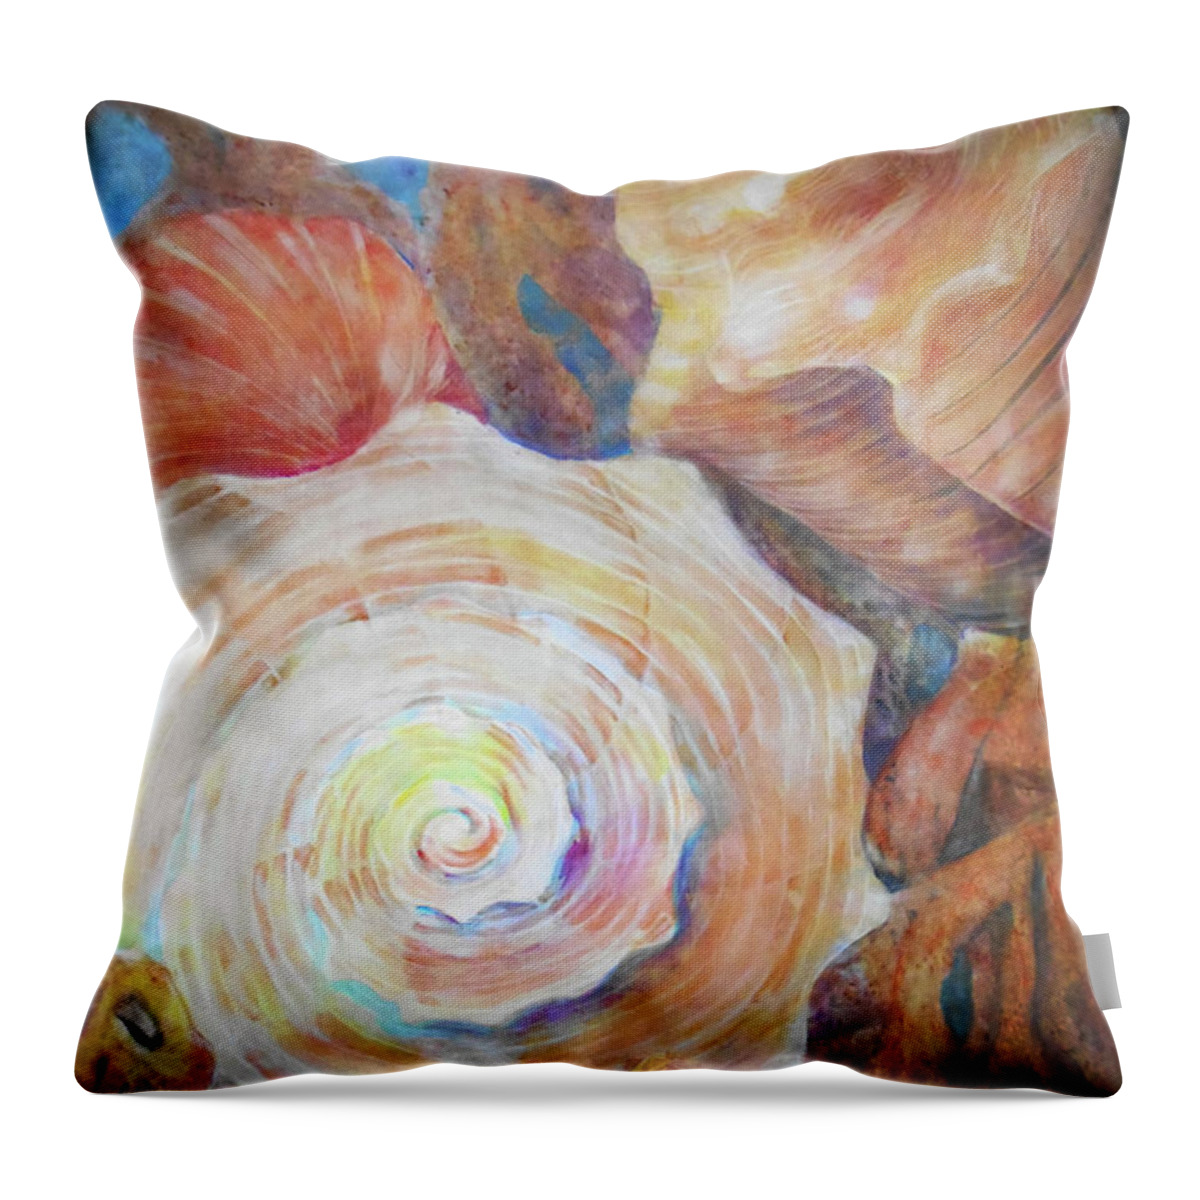 Beach Throw Pillow featuring the painting Shells by Cora Marshall